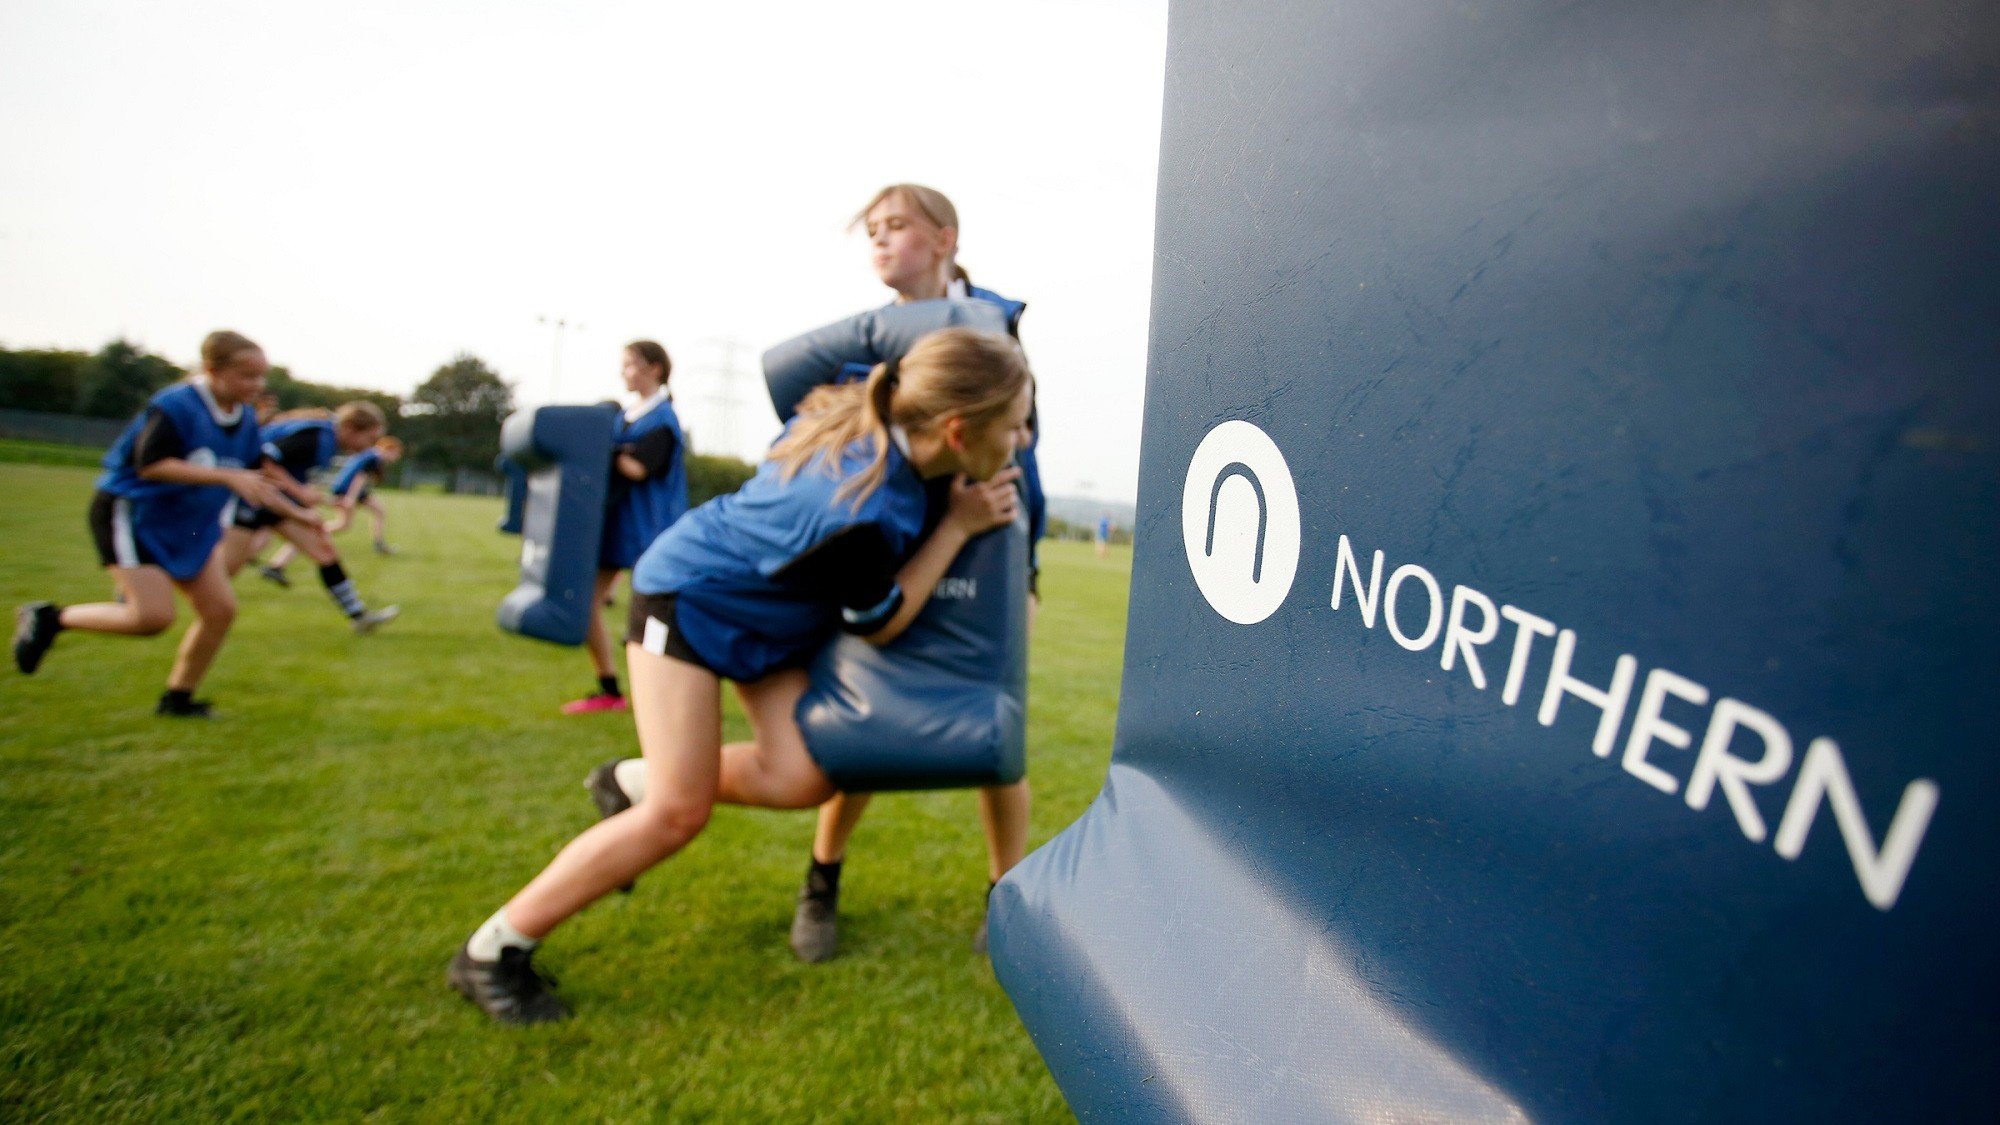 Image shows new rugby kit provided by Northern